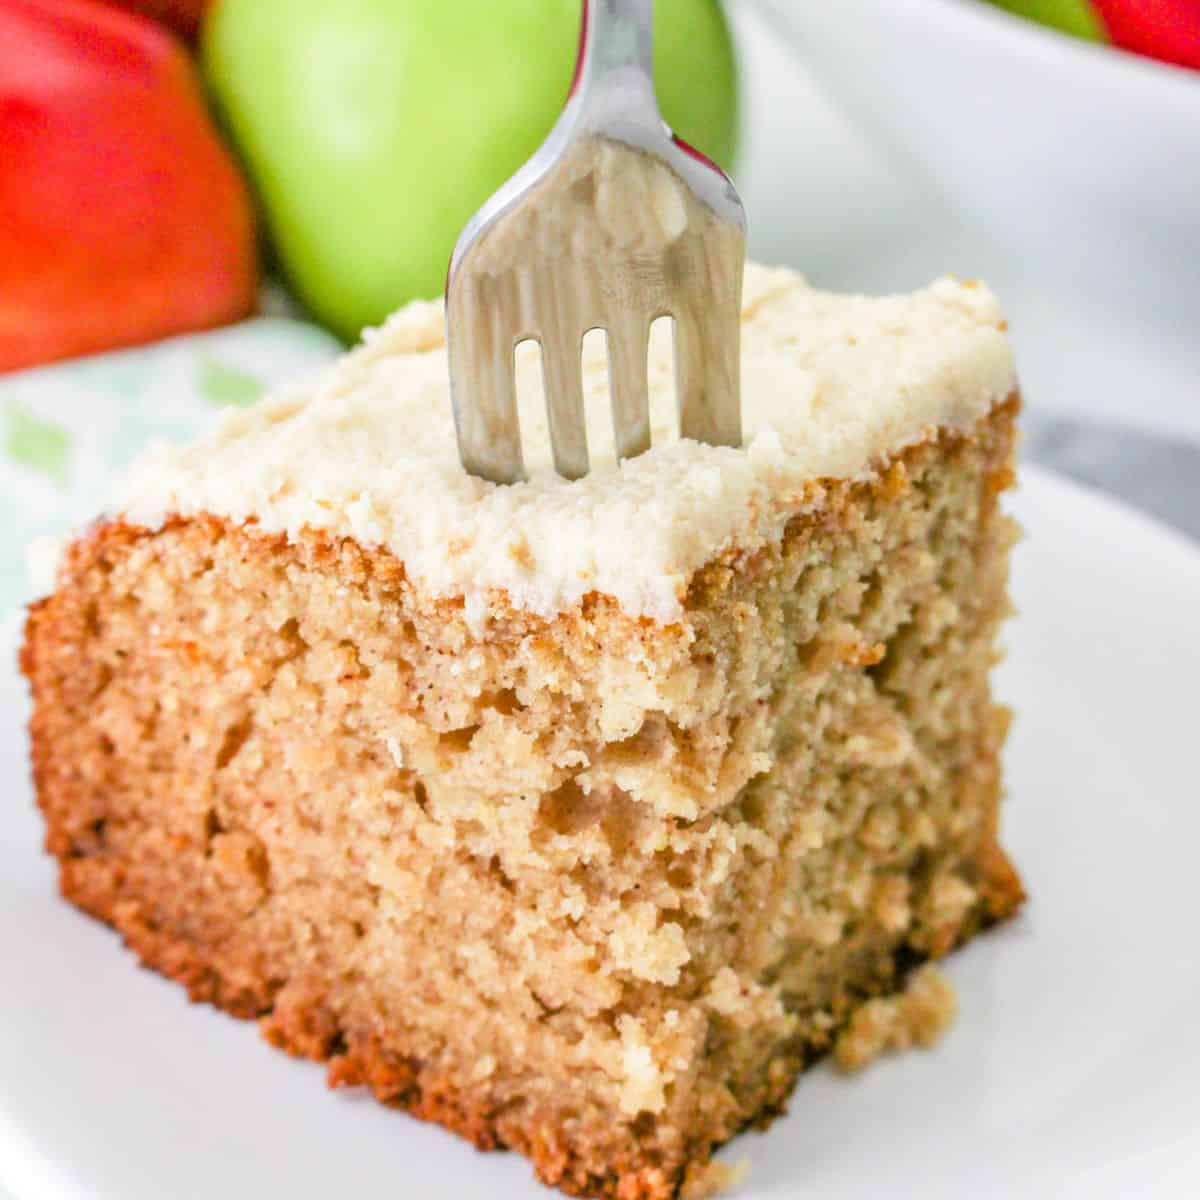 Sugar Free Applesauce Cake, a simple and delicious dessert recipe made with unsweetened applesauce and no added sugar.